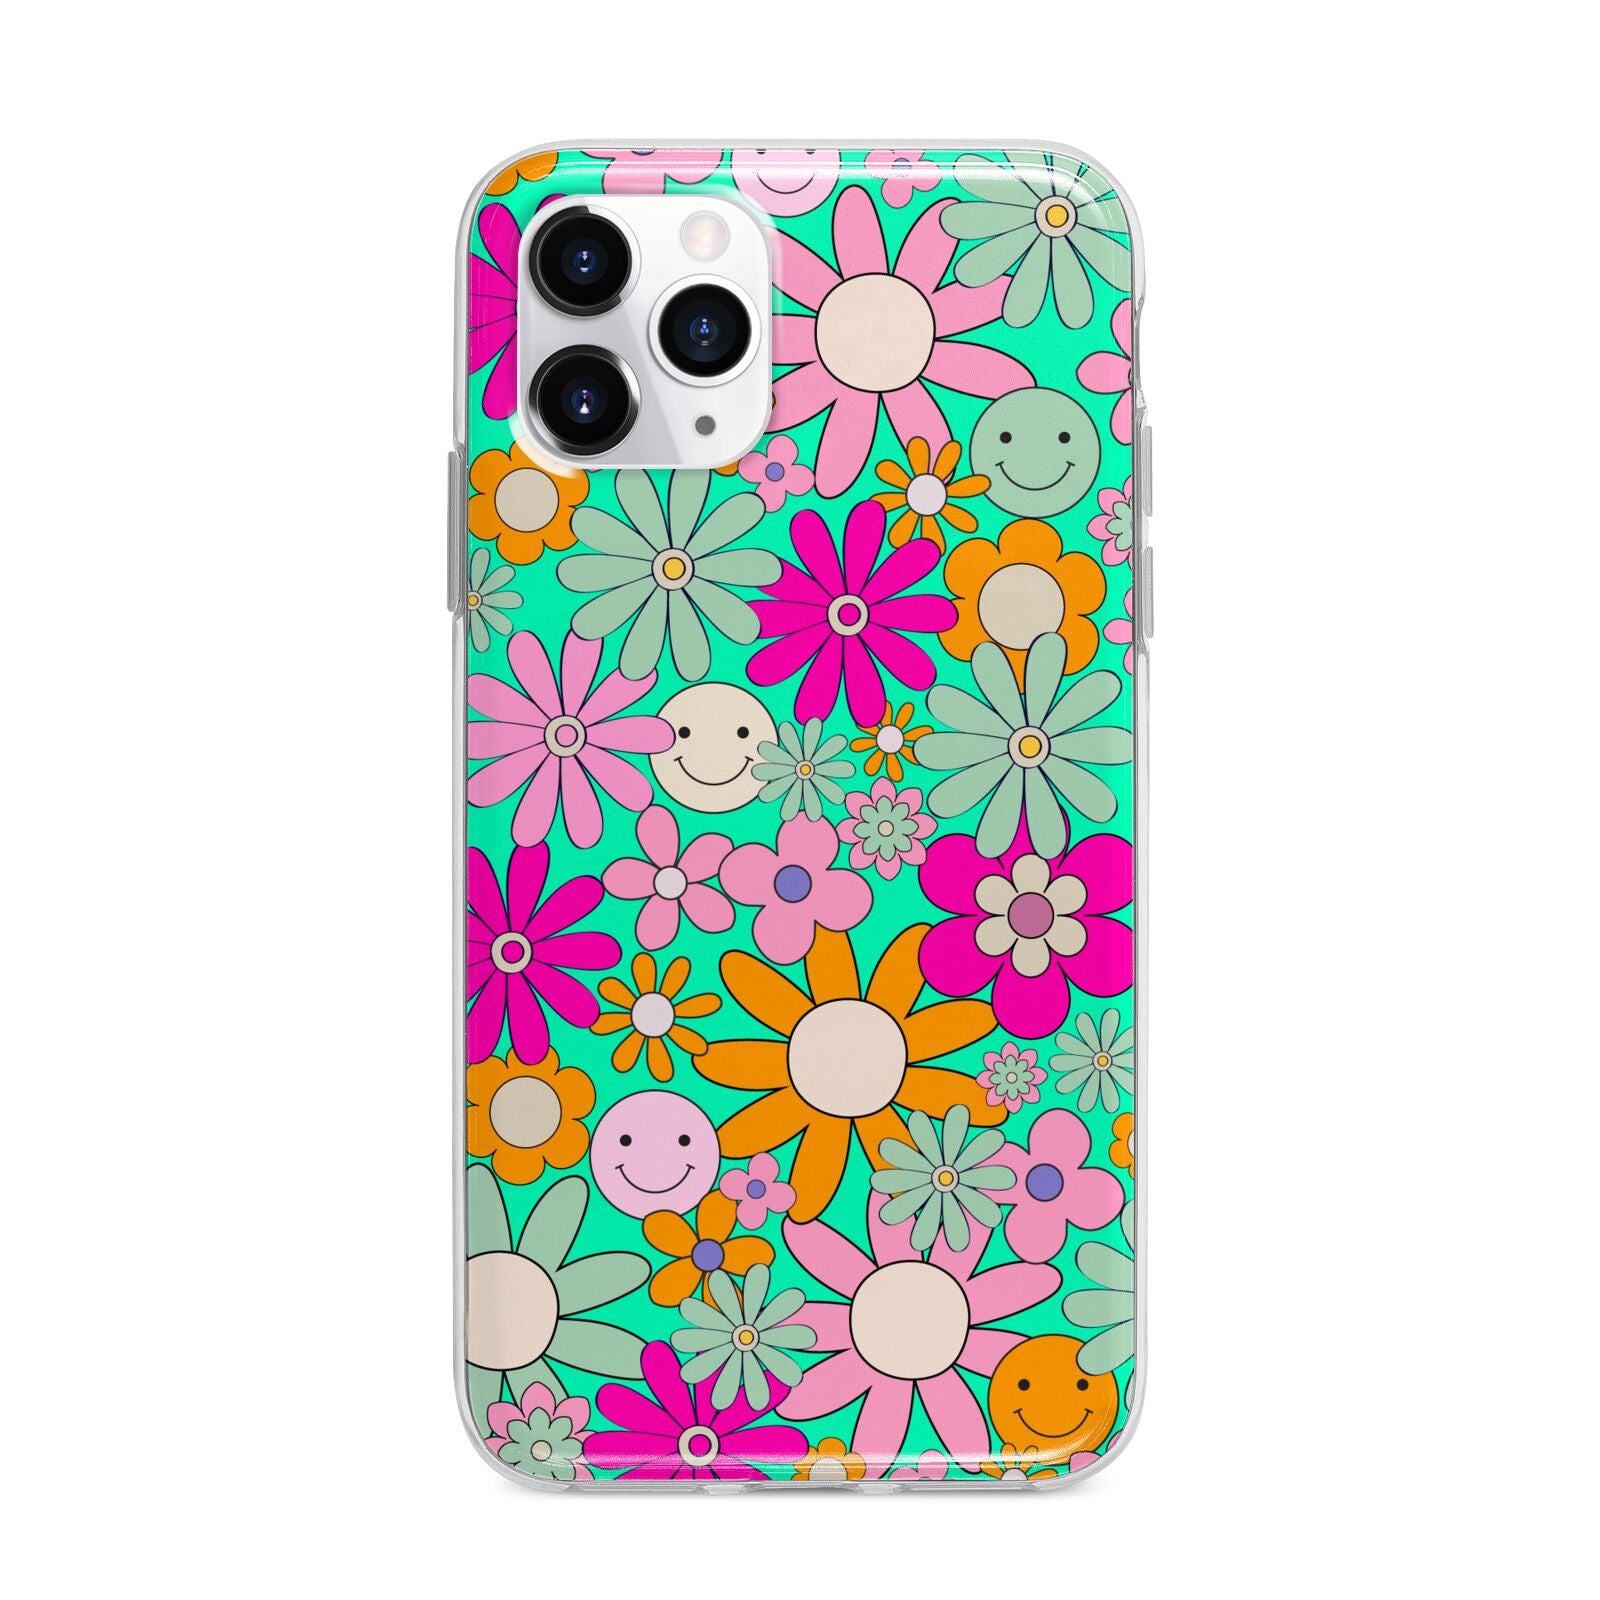 Hippy Floral Apple iPhone 11 Pro Max in Silver with Bumper Case